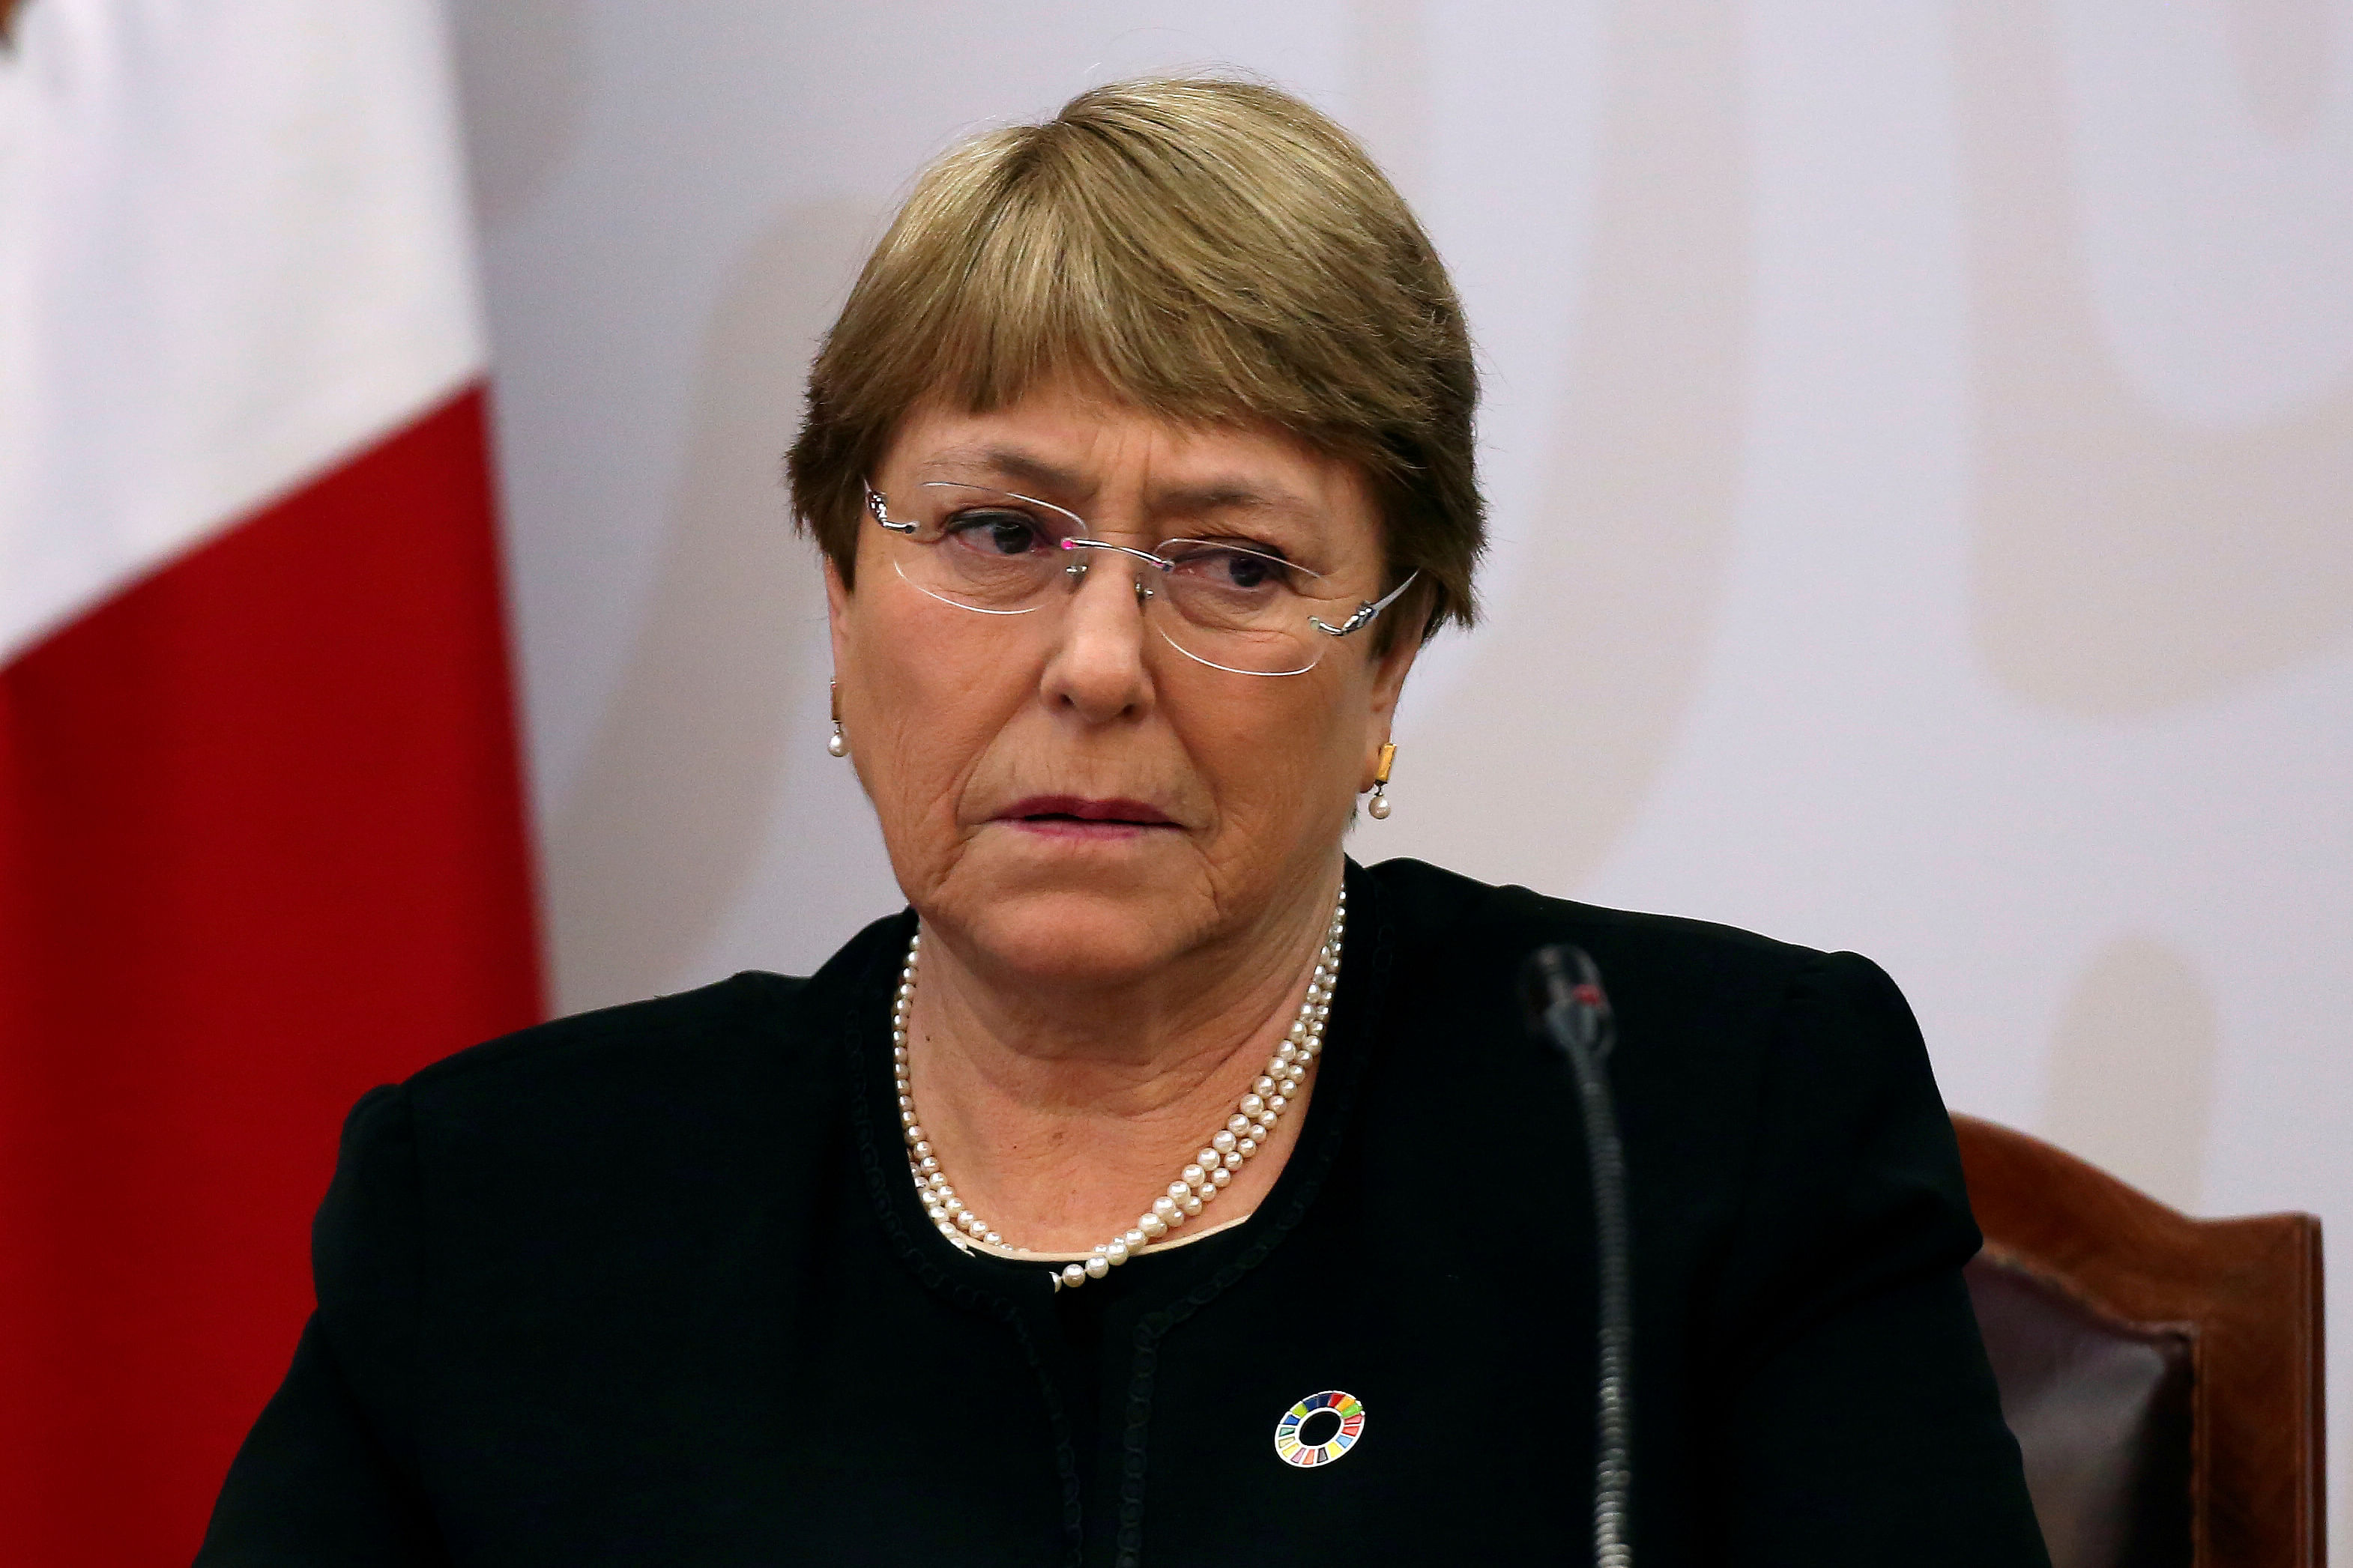 U.N. High Commissioner for Human Rights Michelle Bachelet looks on before signing an agreement on the provision of guidance and technical assistance in the Ayotzinapa case, in Mexico City. (Reuters Photo)